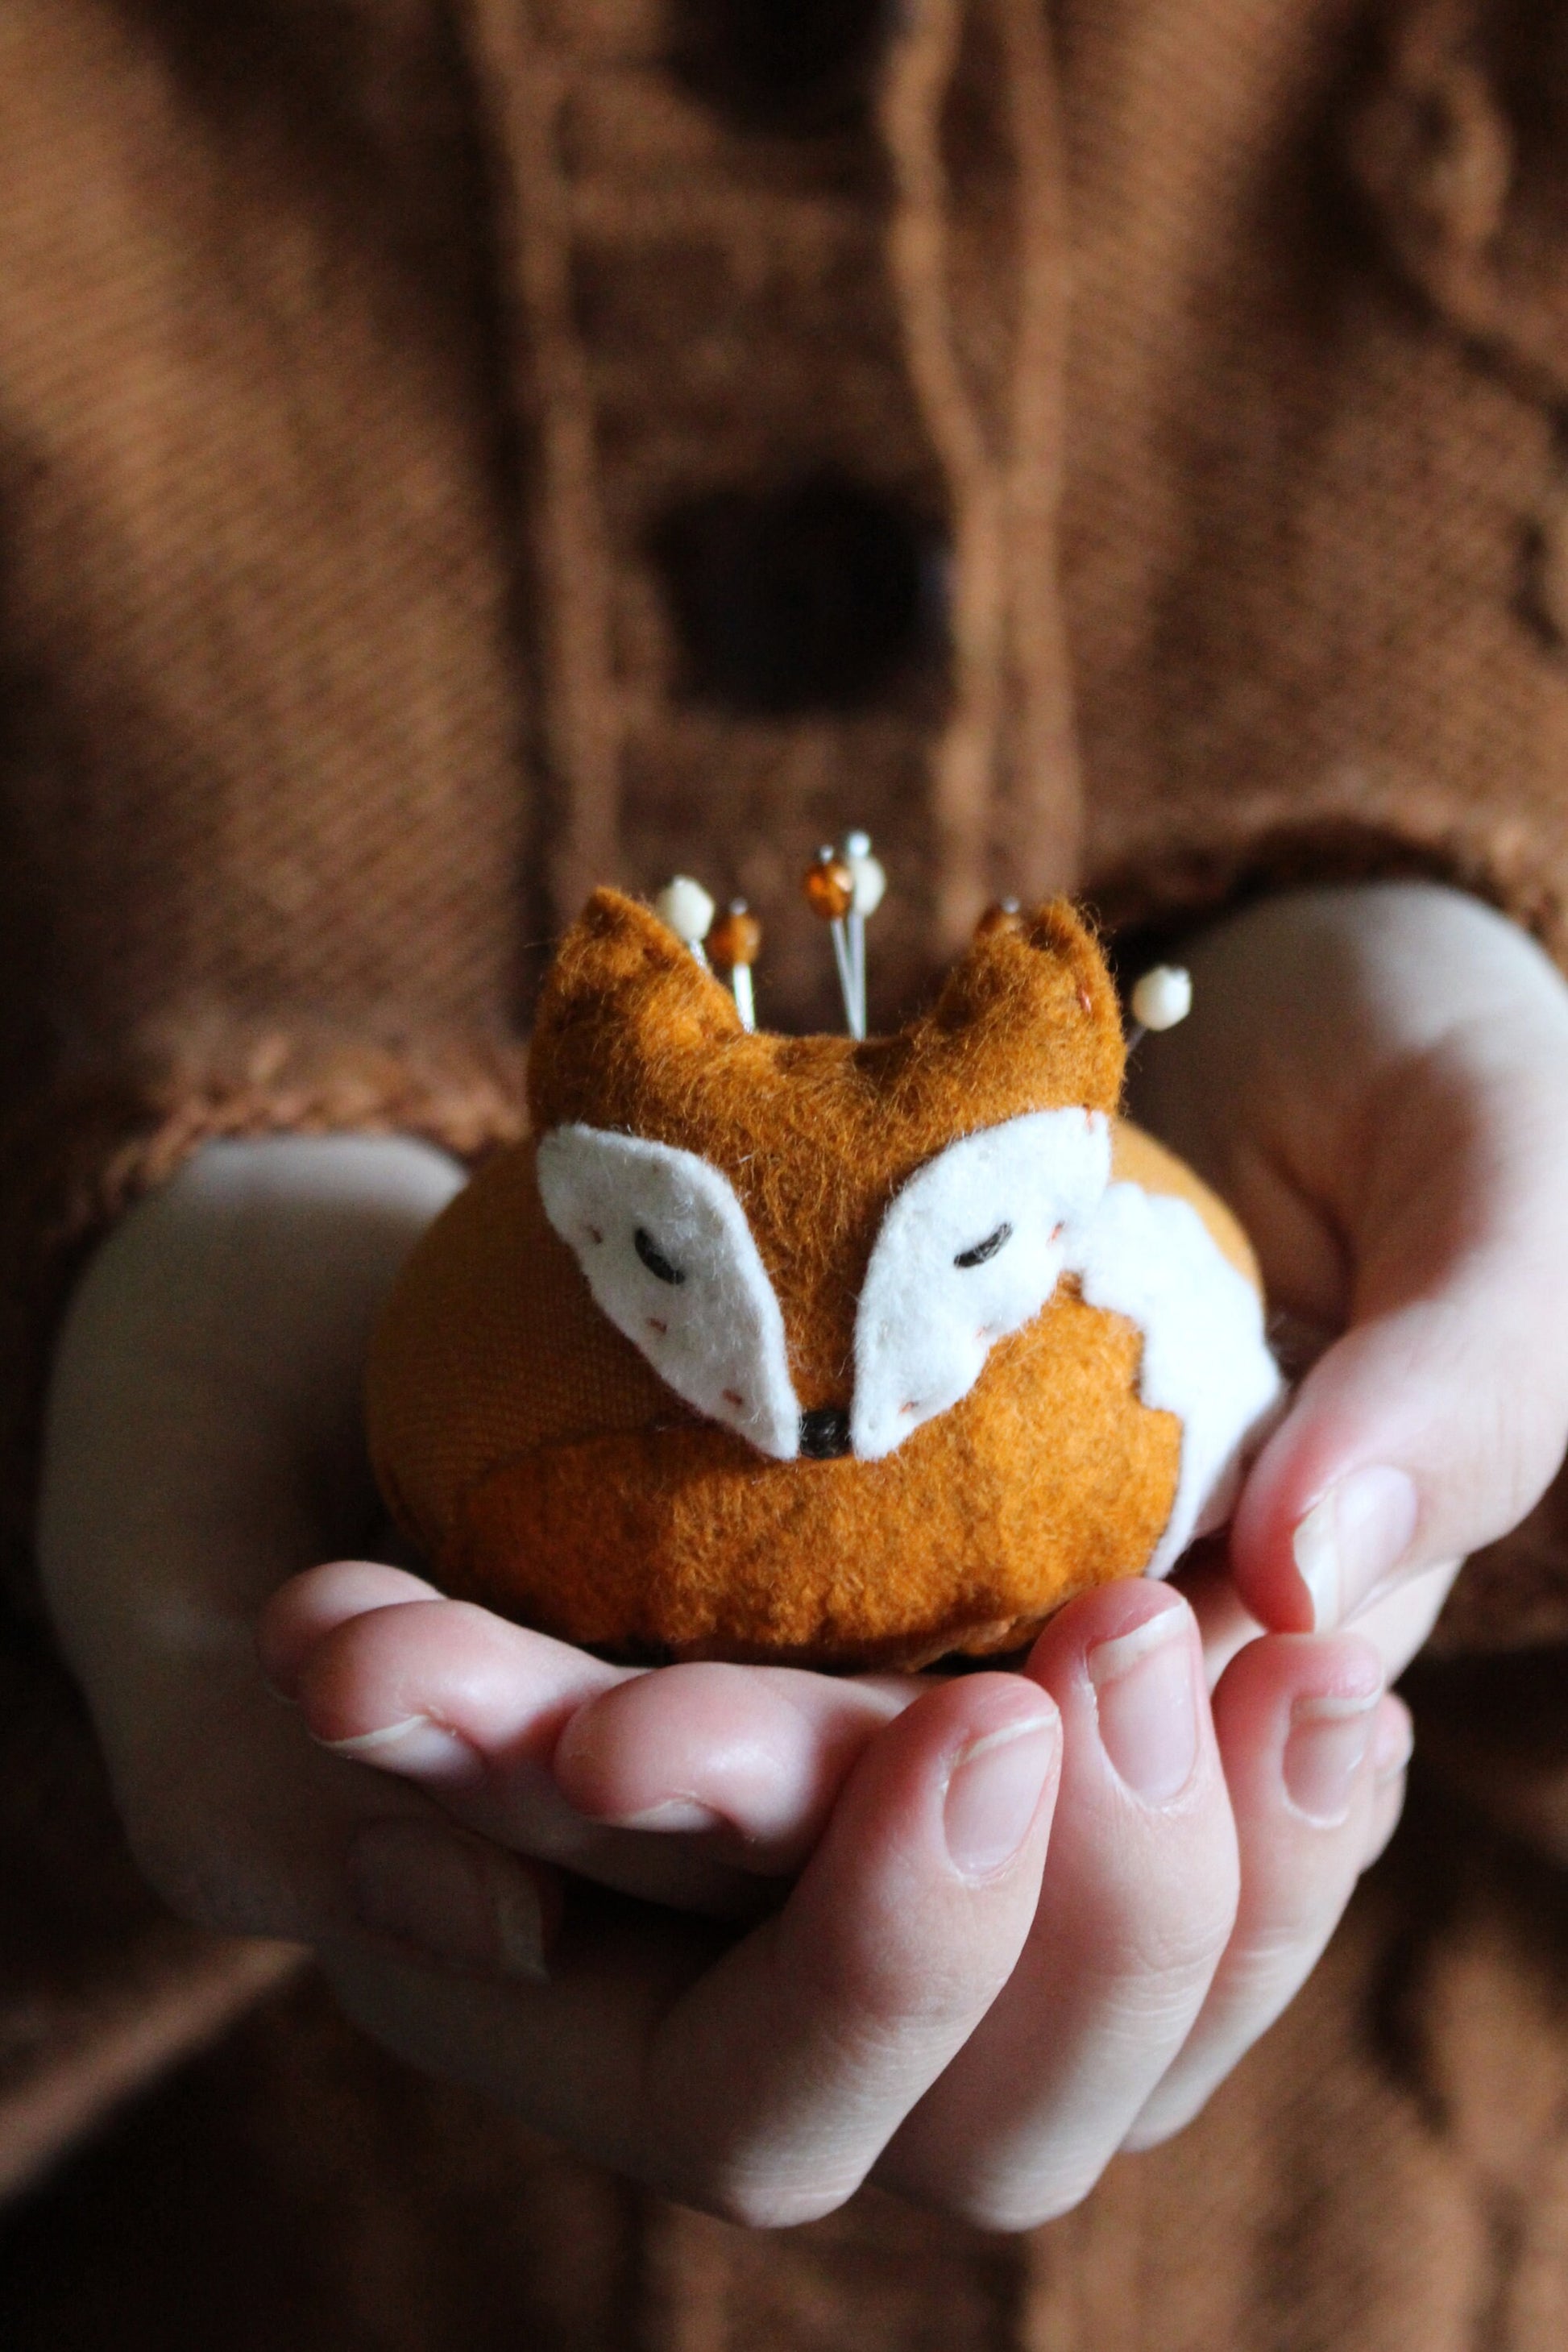 Easy Sewing Kit • Sleepy Fox Pincushion Ready-to-Sew KIT Materials and Instructions • Gift for Sewists // Gift for Crafty Kids